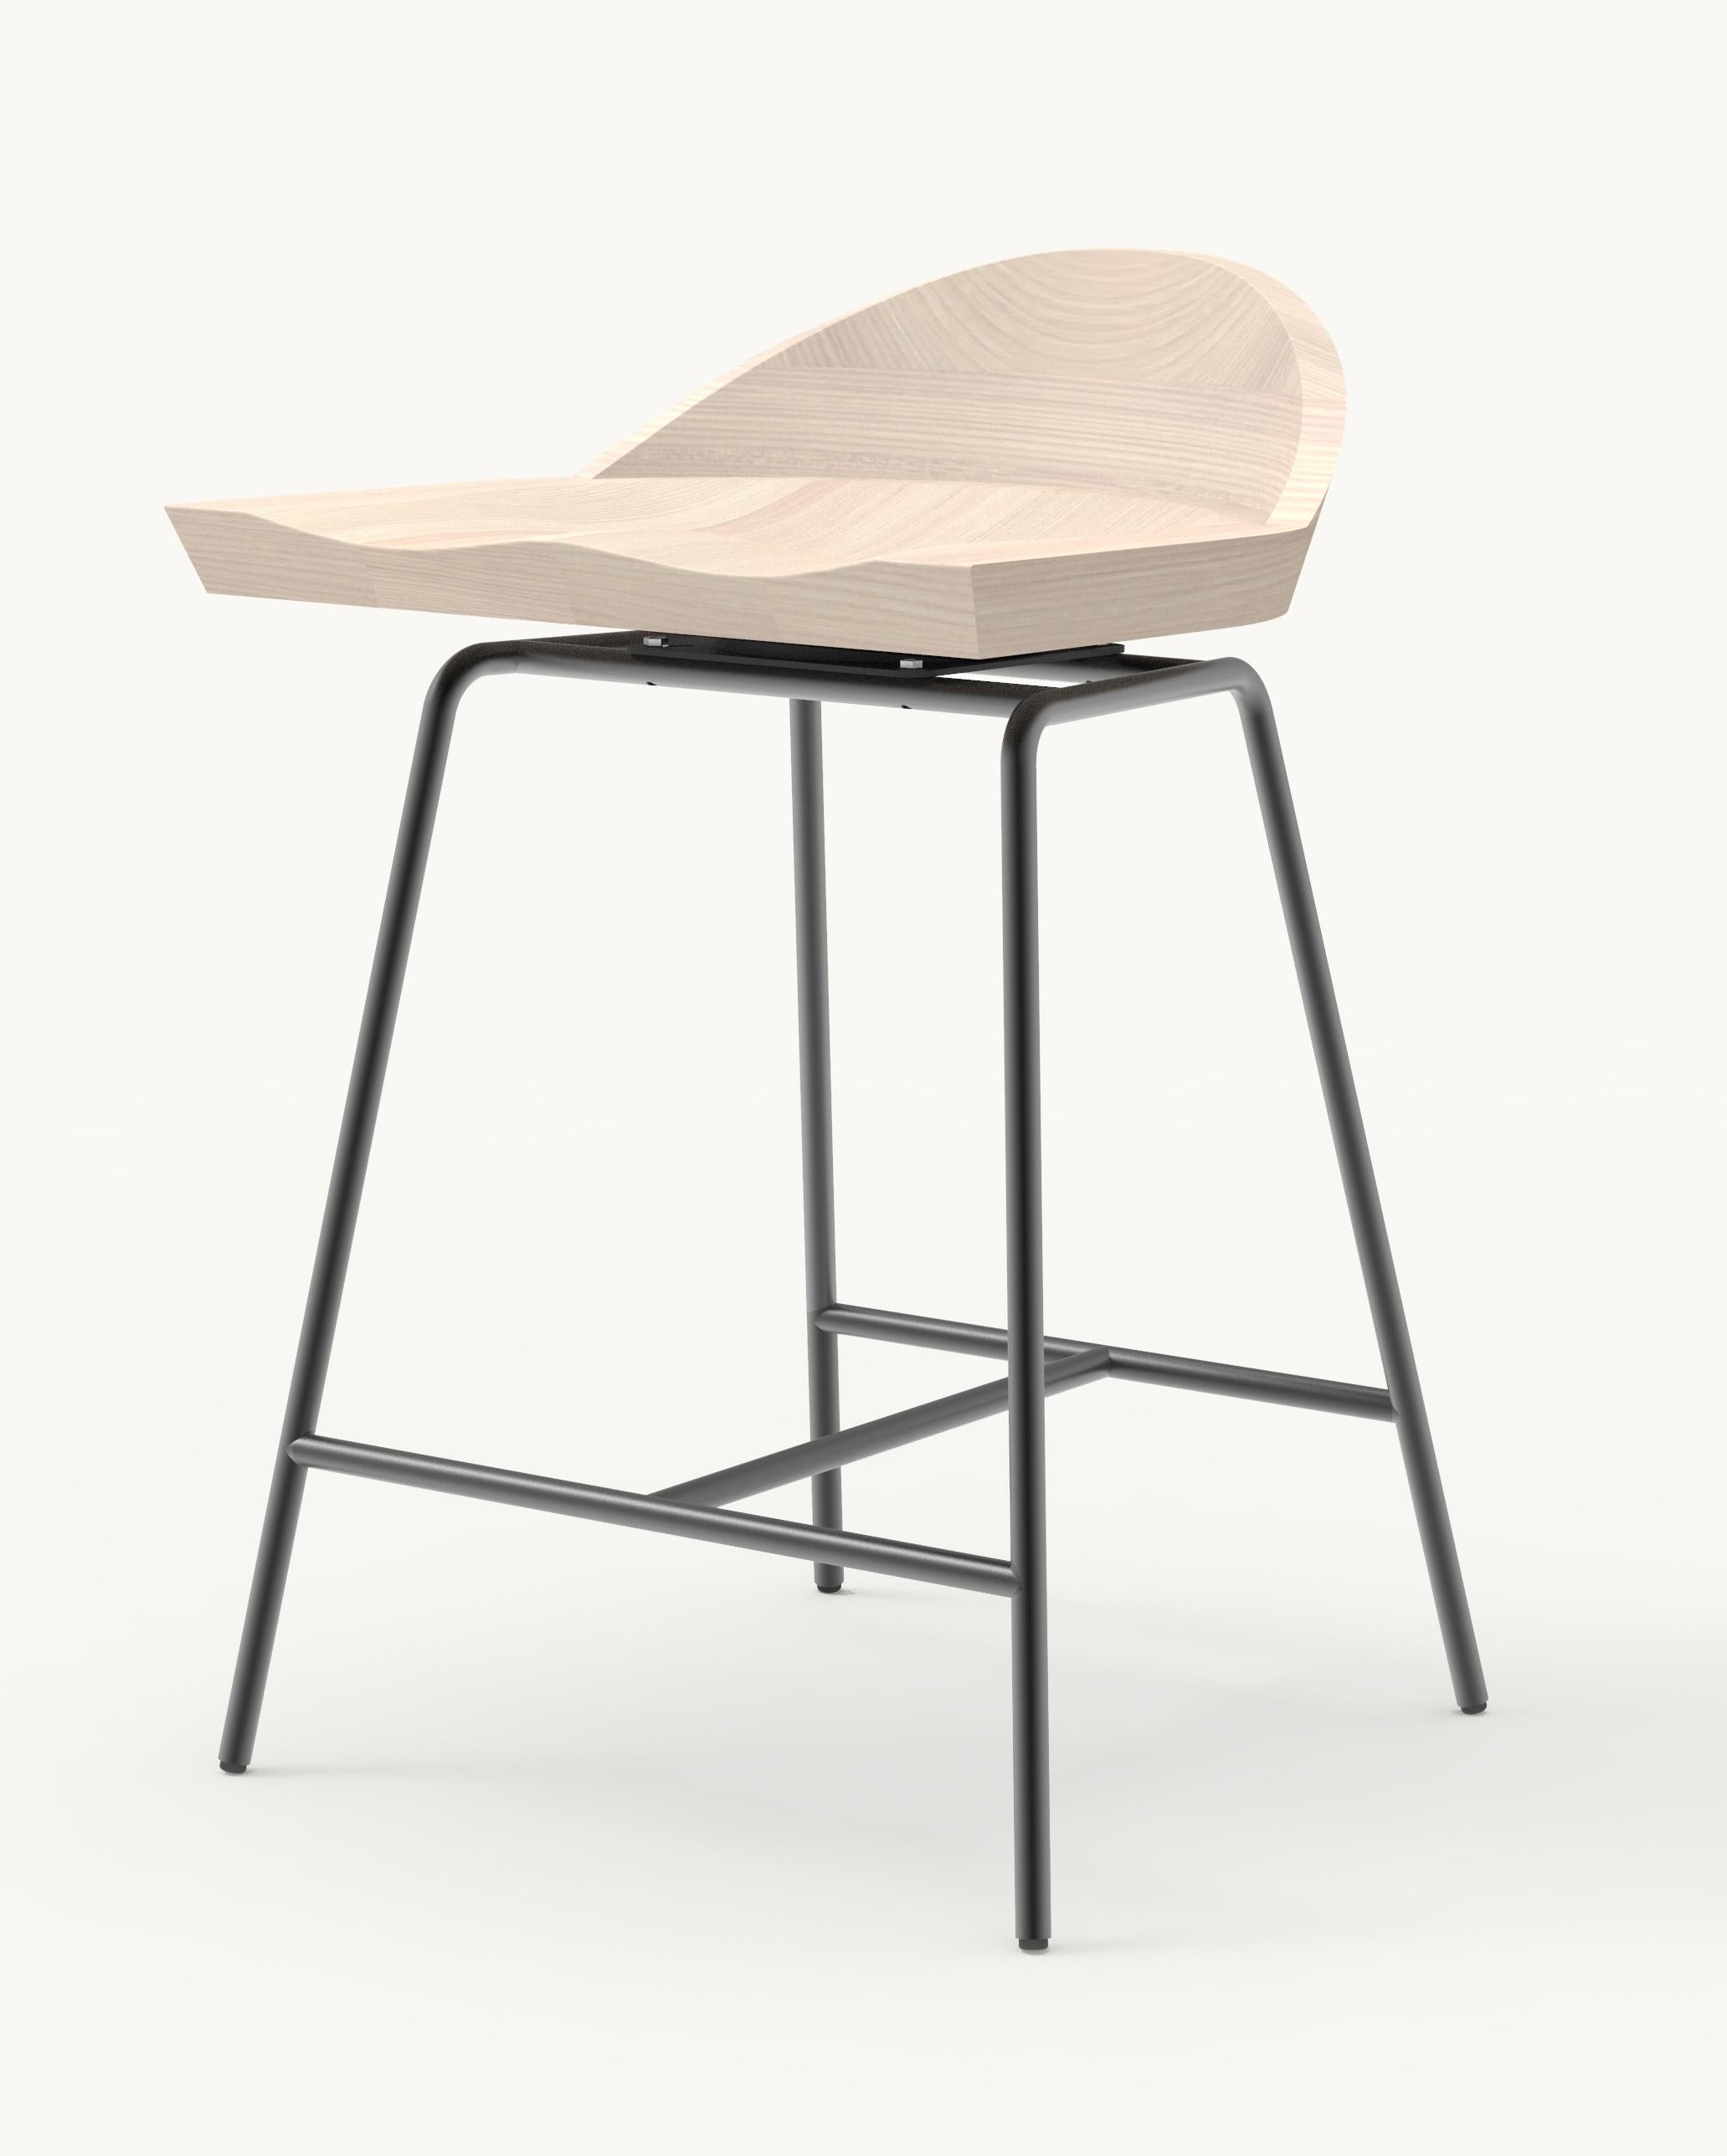 For Sale: Black (Metal Gunmetal) Spindle Counter Stool in Solid White Ash and Steel Designed by Craig Bassam